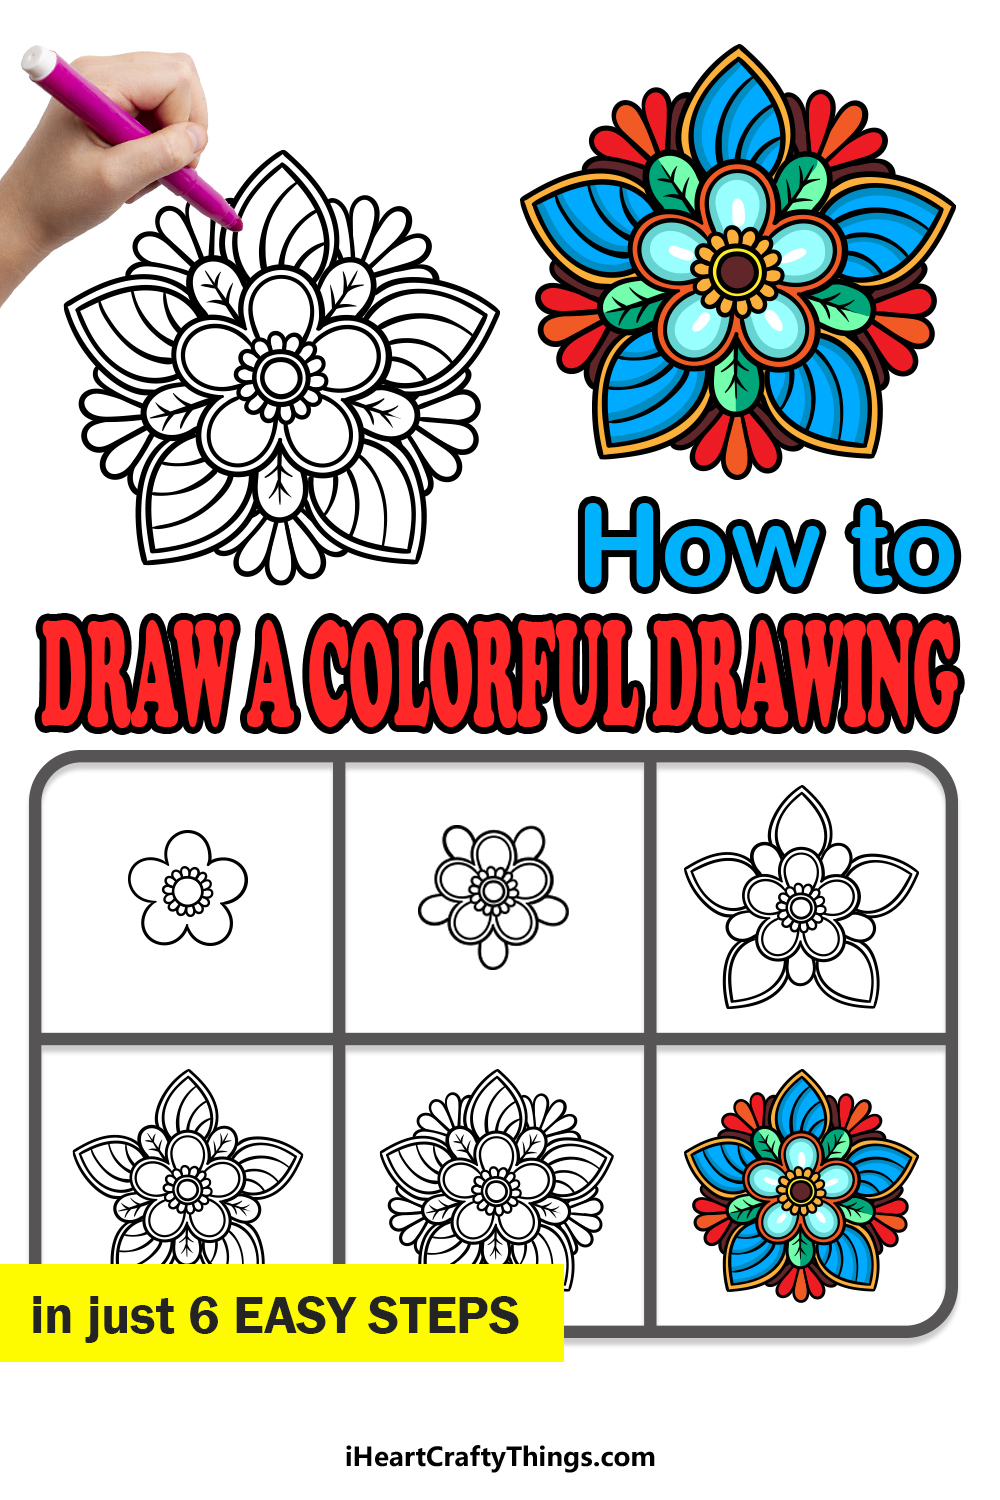 how to draw a Colorful Drawing in 6 easy steps